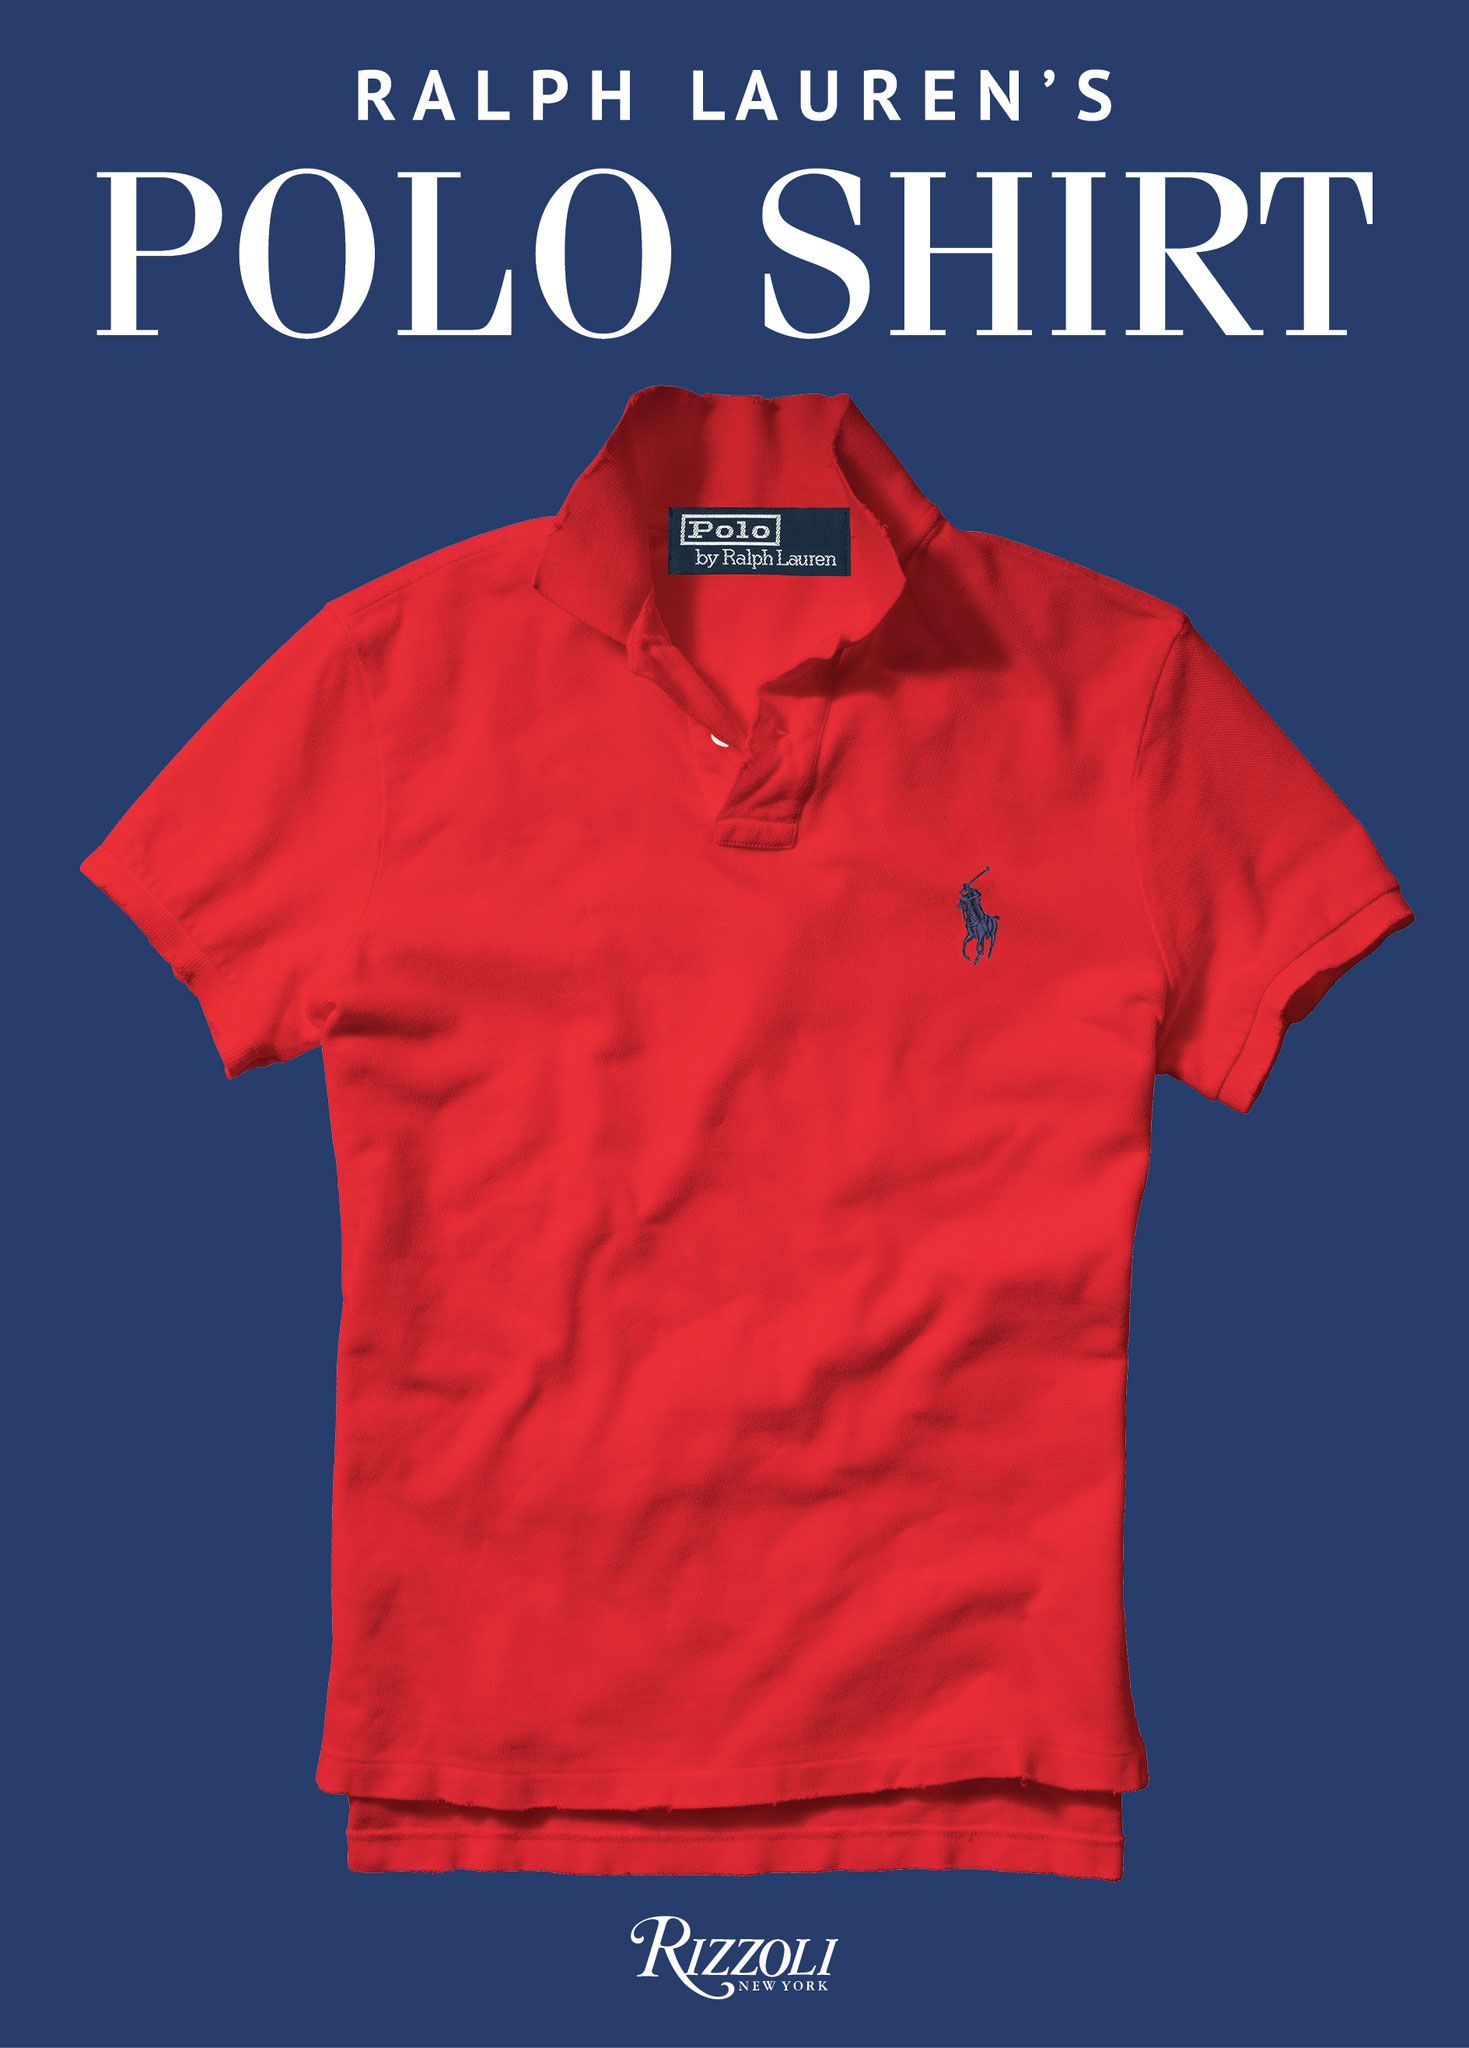 A New Book Looks at 50 Years of Ralph Lauren's Polo Shirt